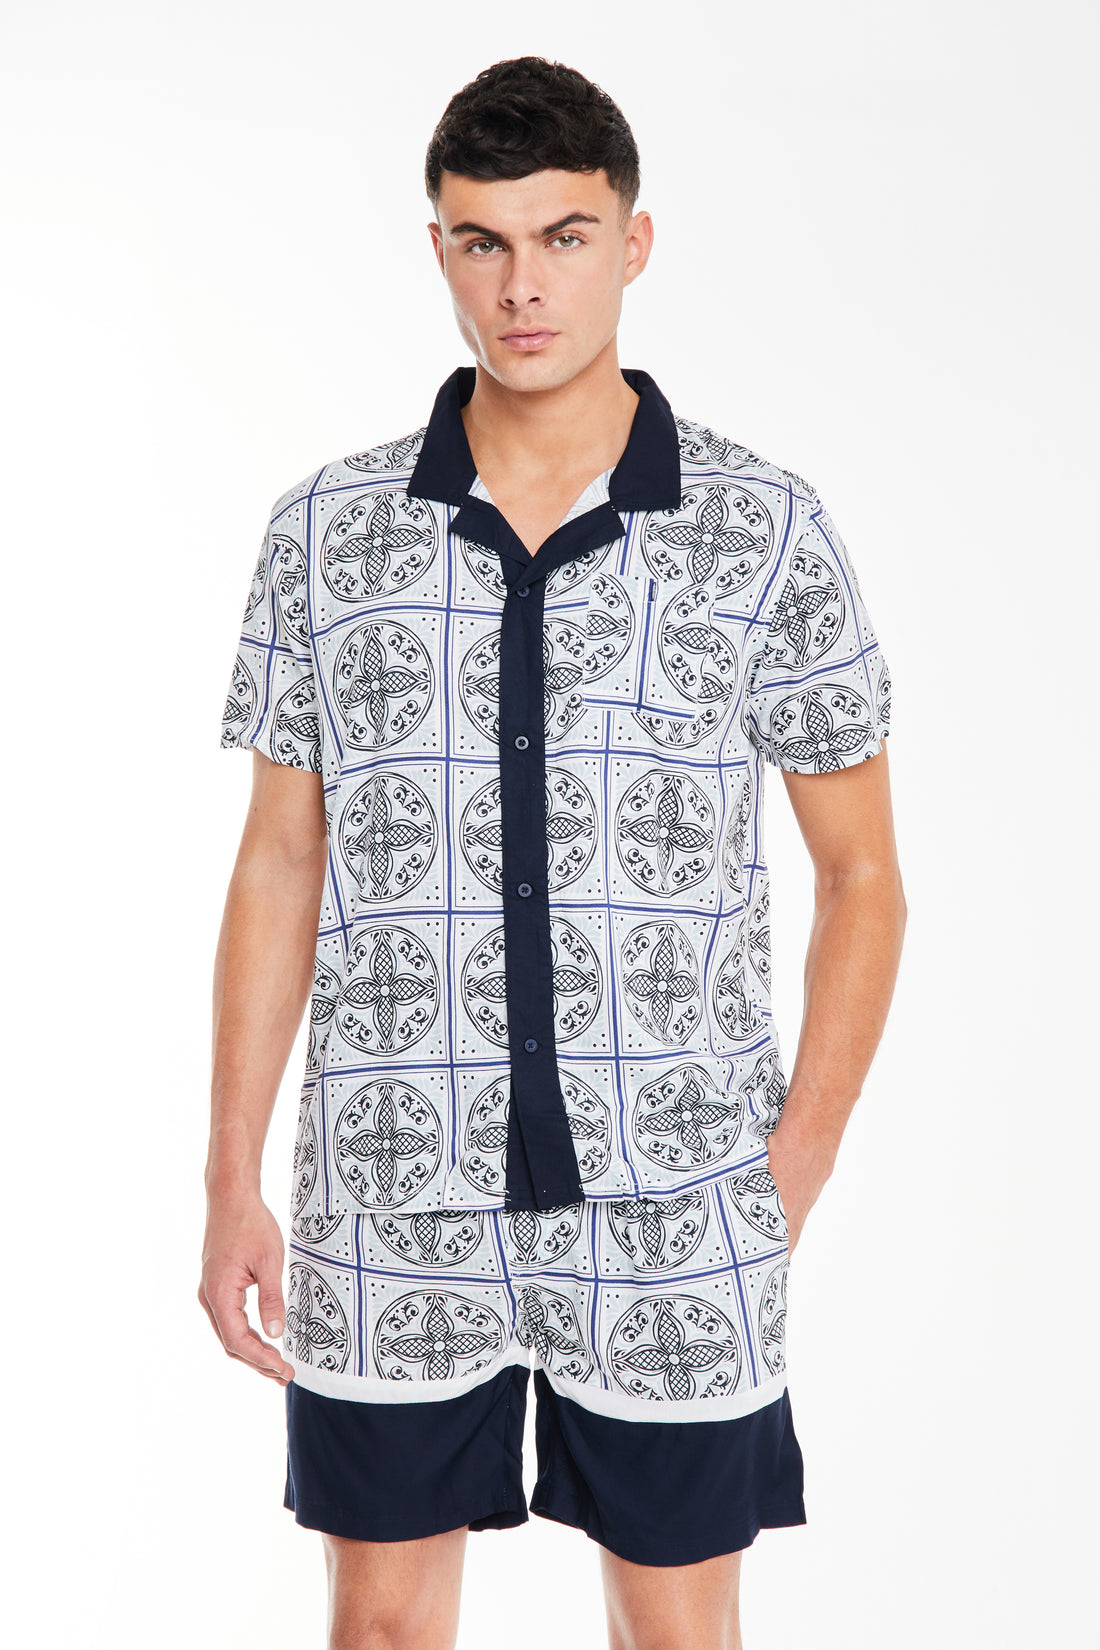 Men's twin set clothing with patterns in white and dark blue